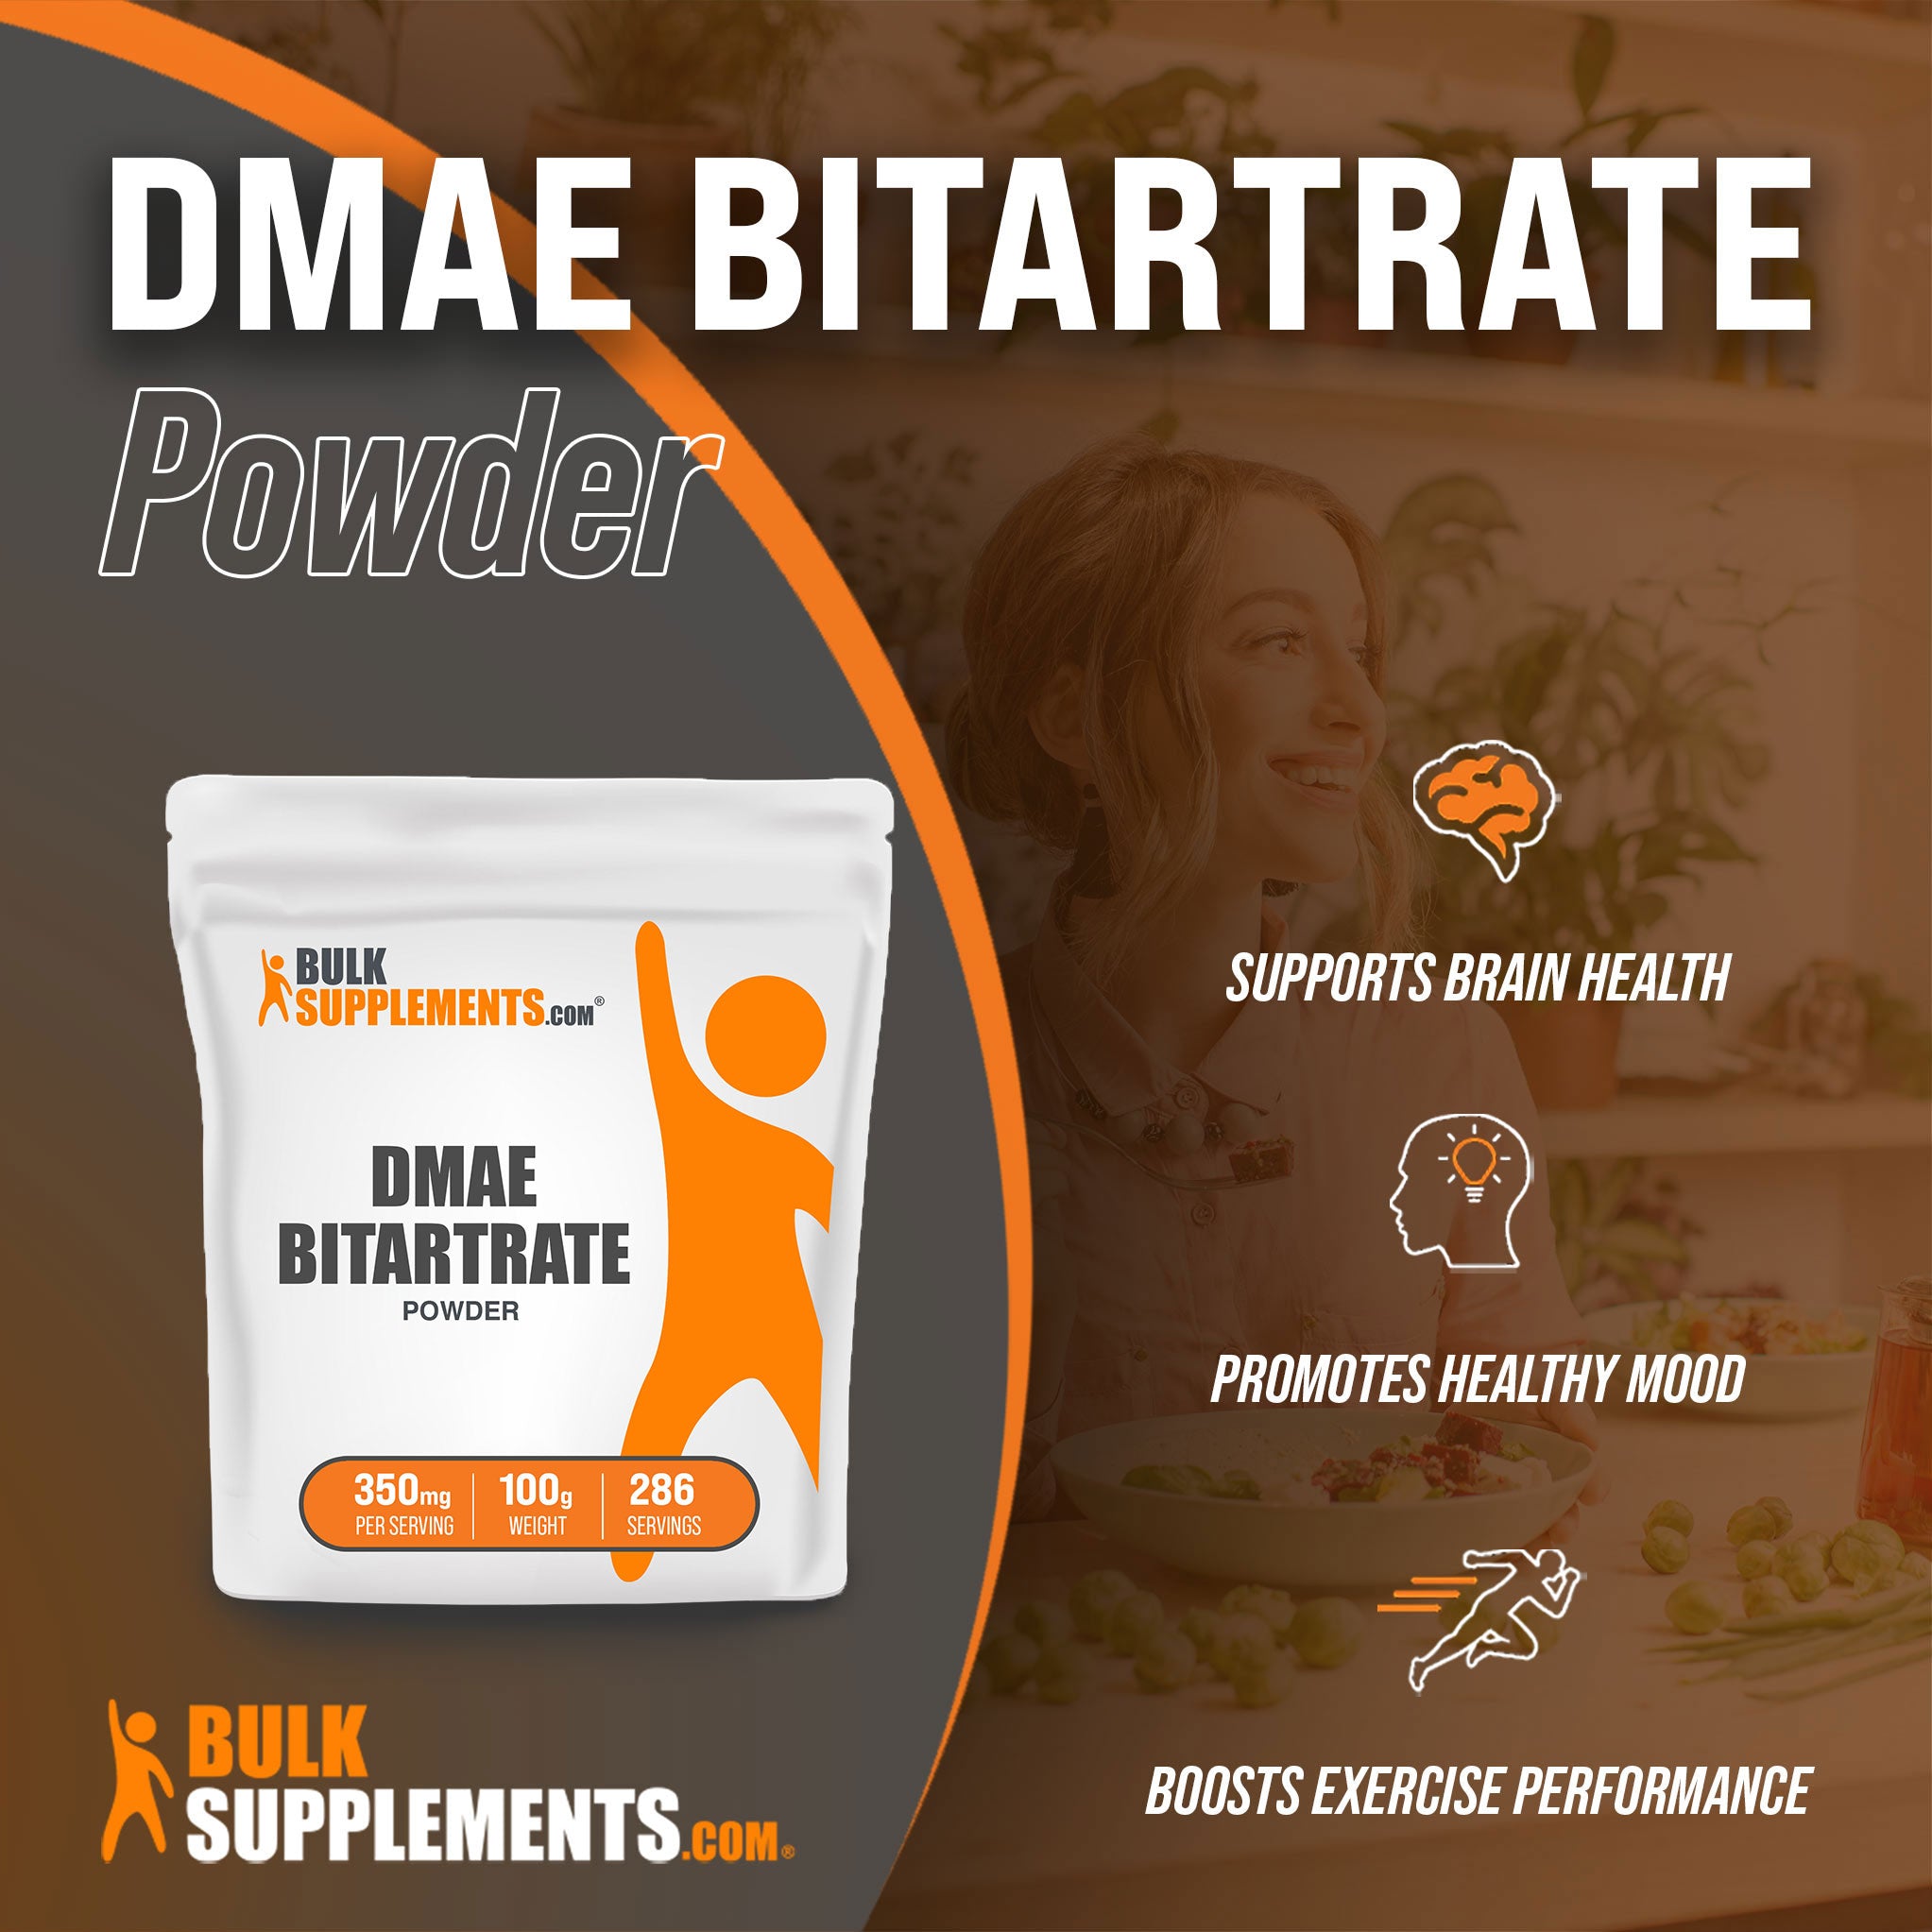 Benefits of DMAE Bitartrate; supports brain health, promotes healthy mood, boosts exercise performance